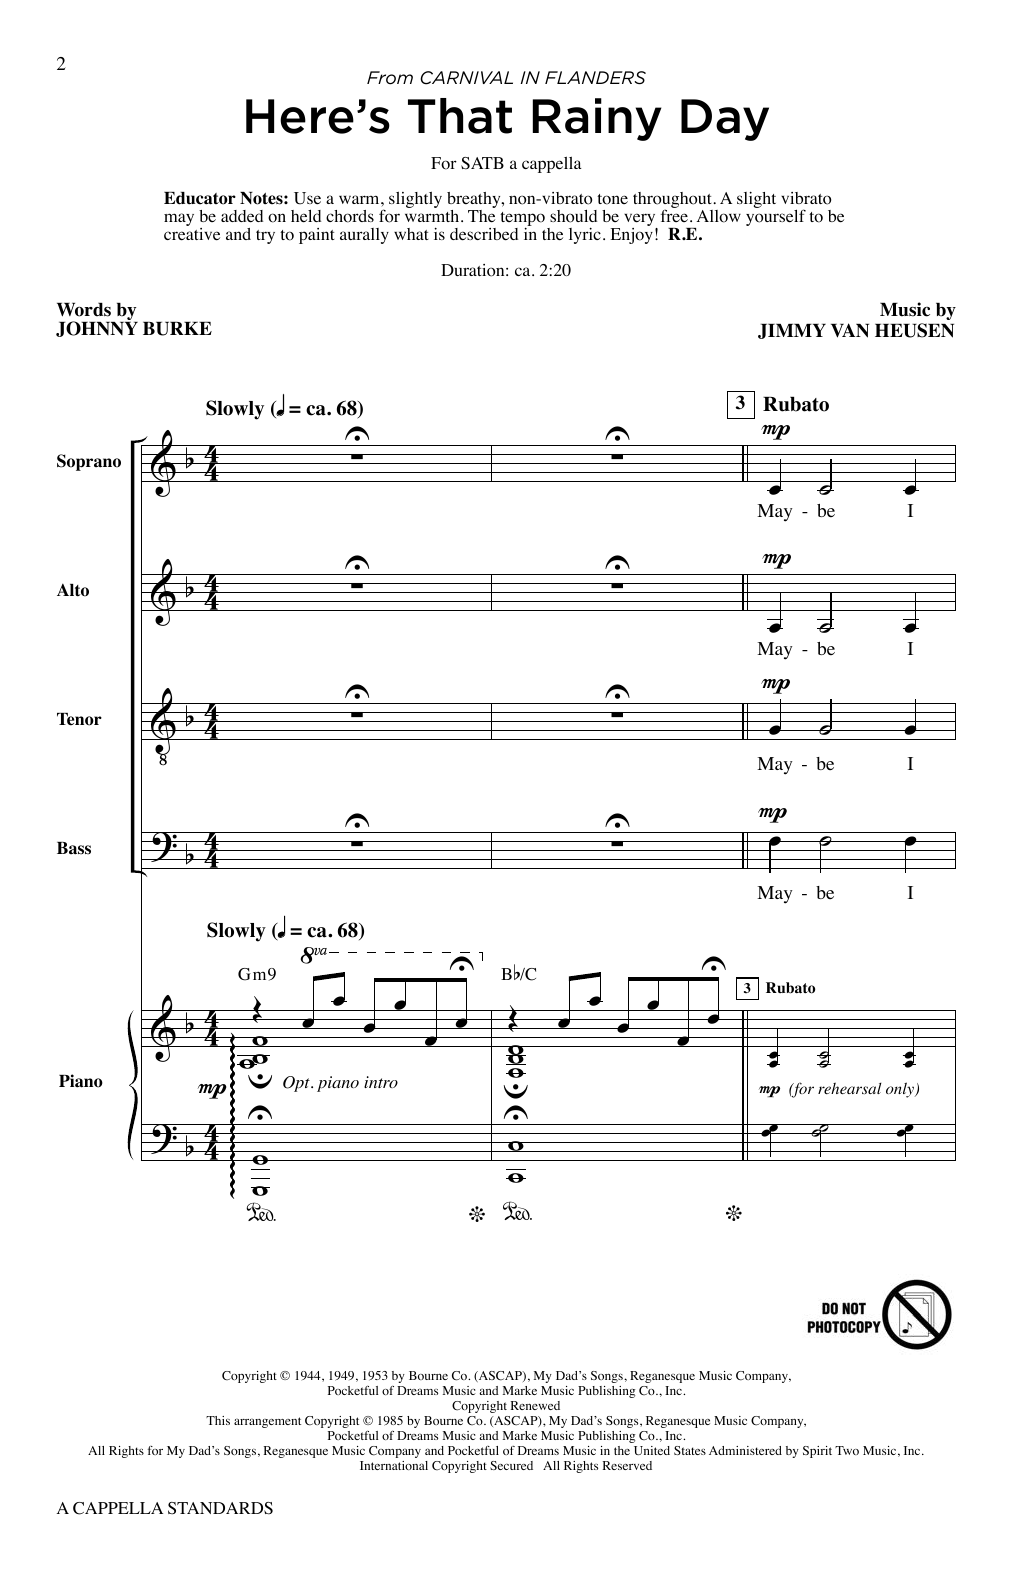 Roger Emerson A Cappella Standards sheet music notes printable PDF score